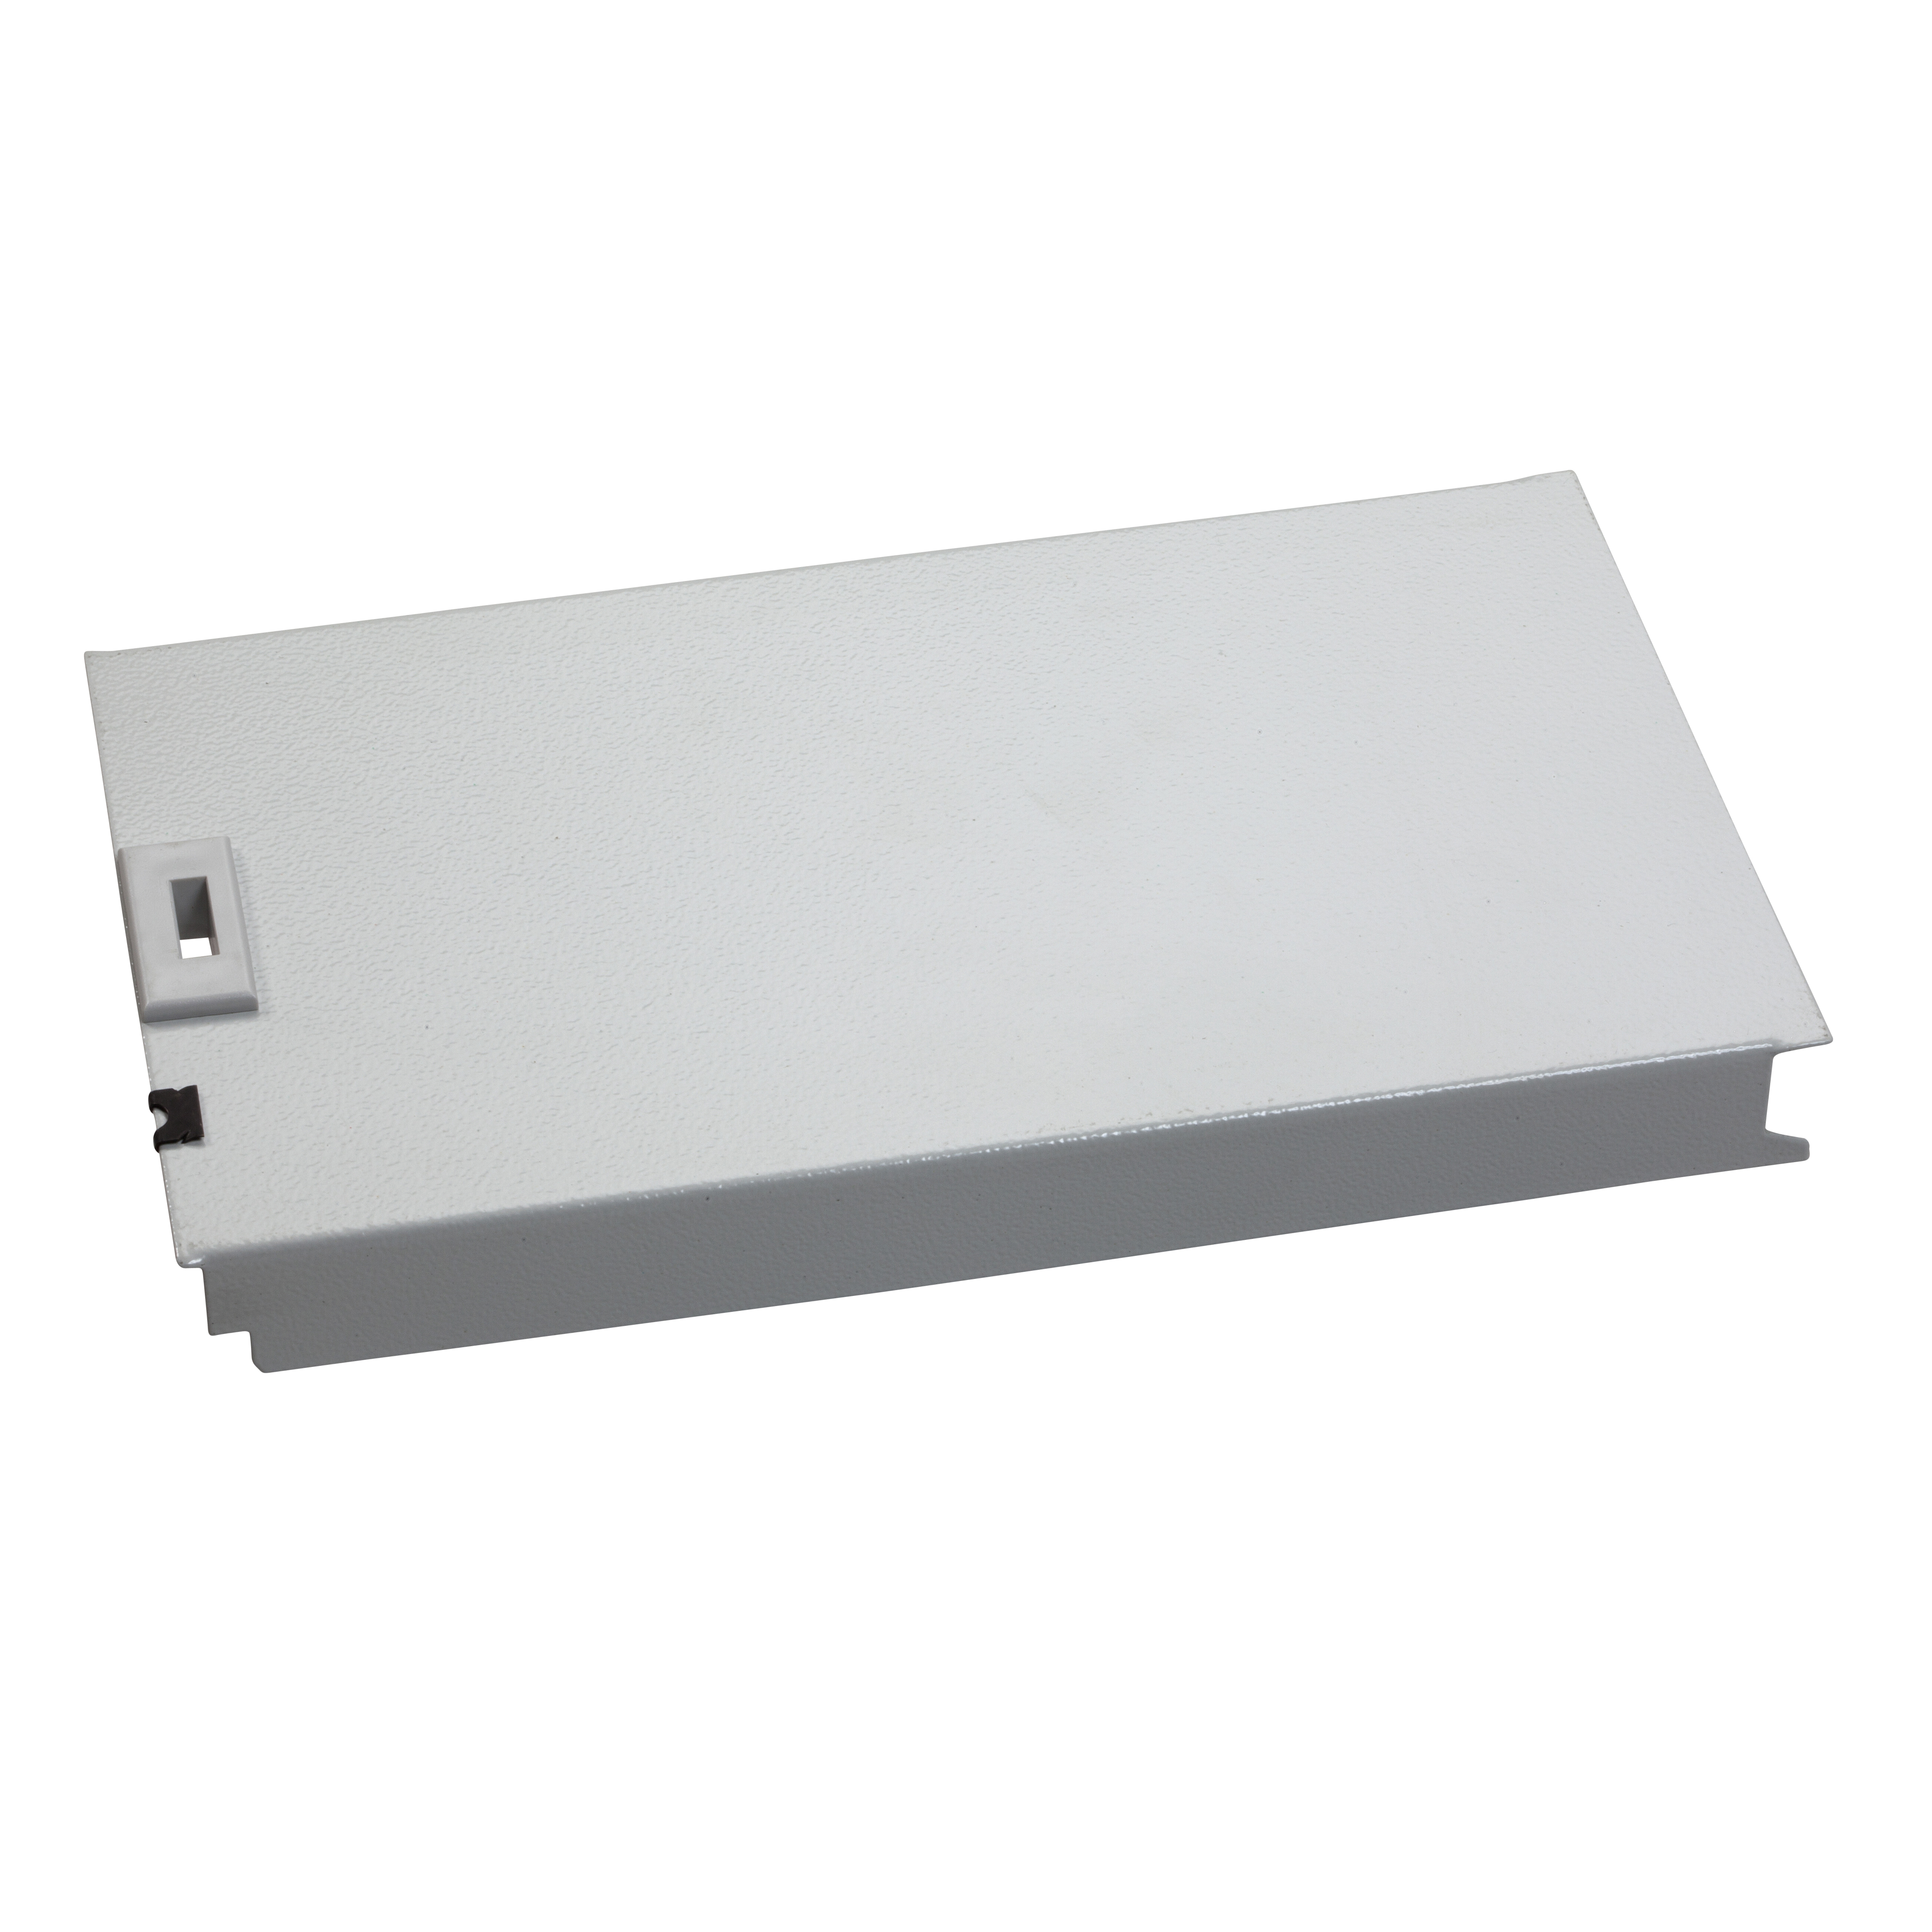 RAVNA front plate W600mm